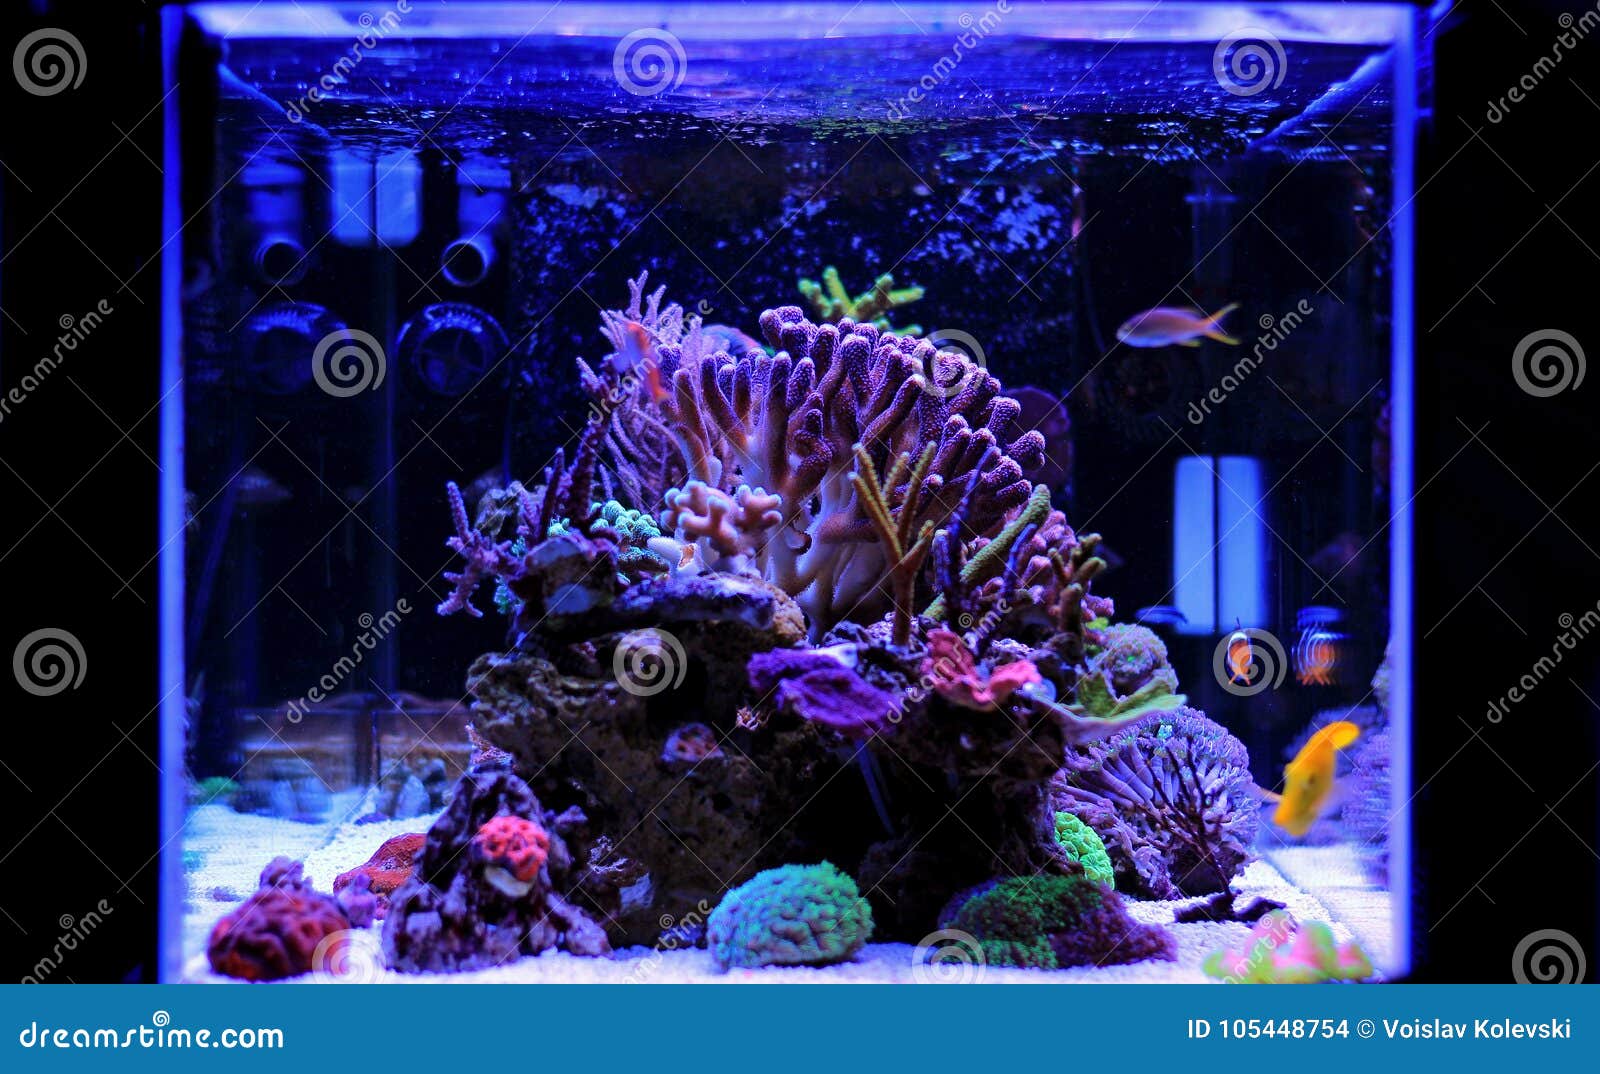 Saltwater Aquarium Coral Reef Tank Scene At Home Stock Photo Image Of Bright Life 105448754,Wagh Bakri Spiced Tea